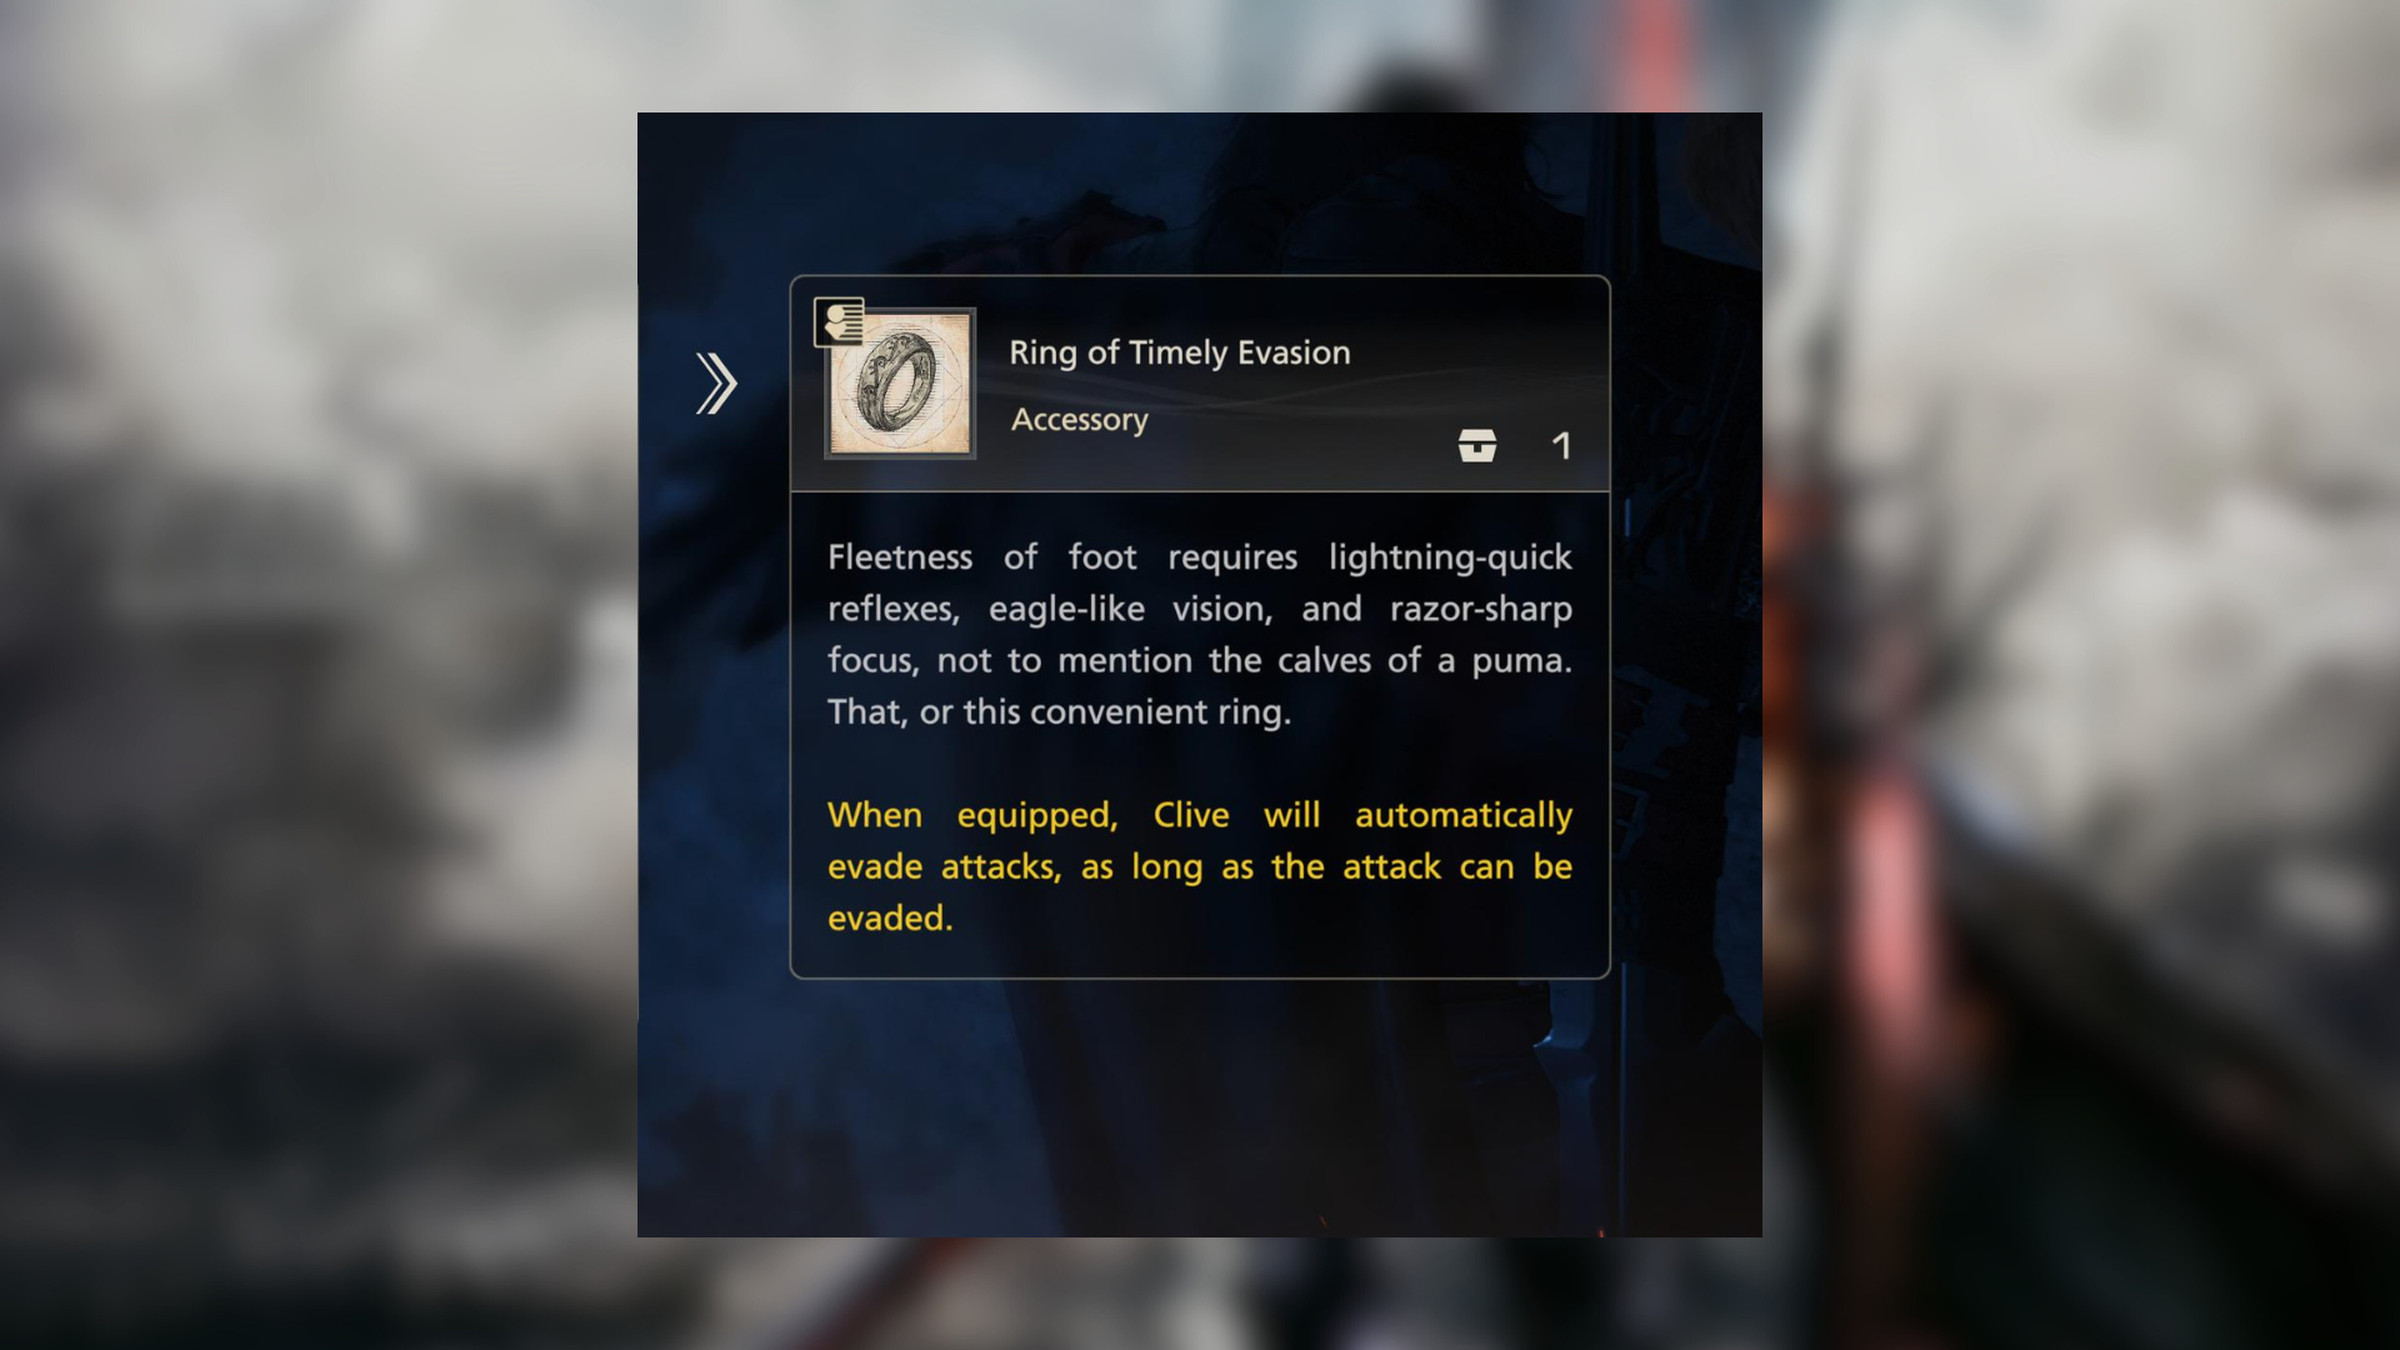 Screenshot from Final Fantasy XVI featuring a description of the Ring of Timely Evasion. The text reads: Fleetness of foot requires lightning-quick reflexes, eagle-like vision, and razor-sharp focus, not to mention the calves of a puma. That, or this convenient ring. Effects: When equipped, Clive will automatically evade attacks, as long as the attack can be evaded. 